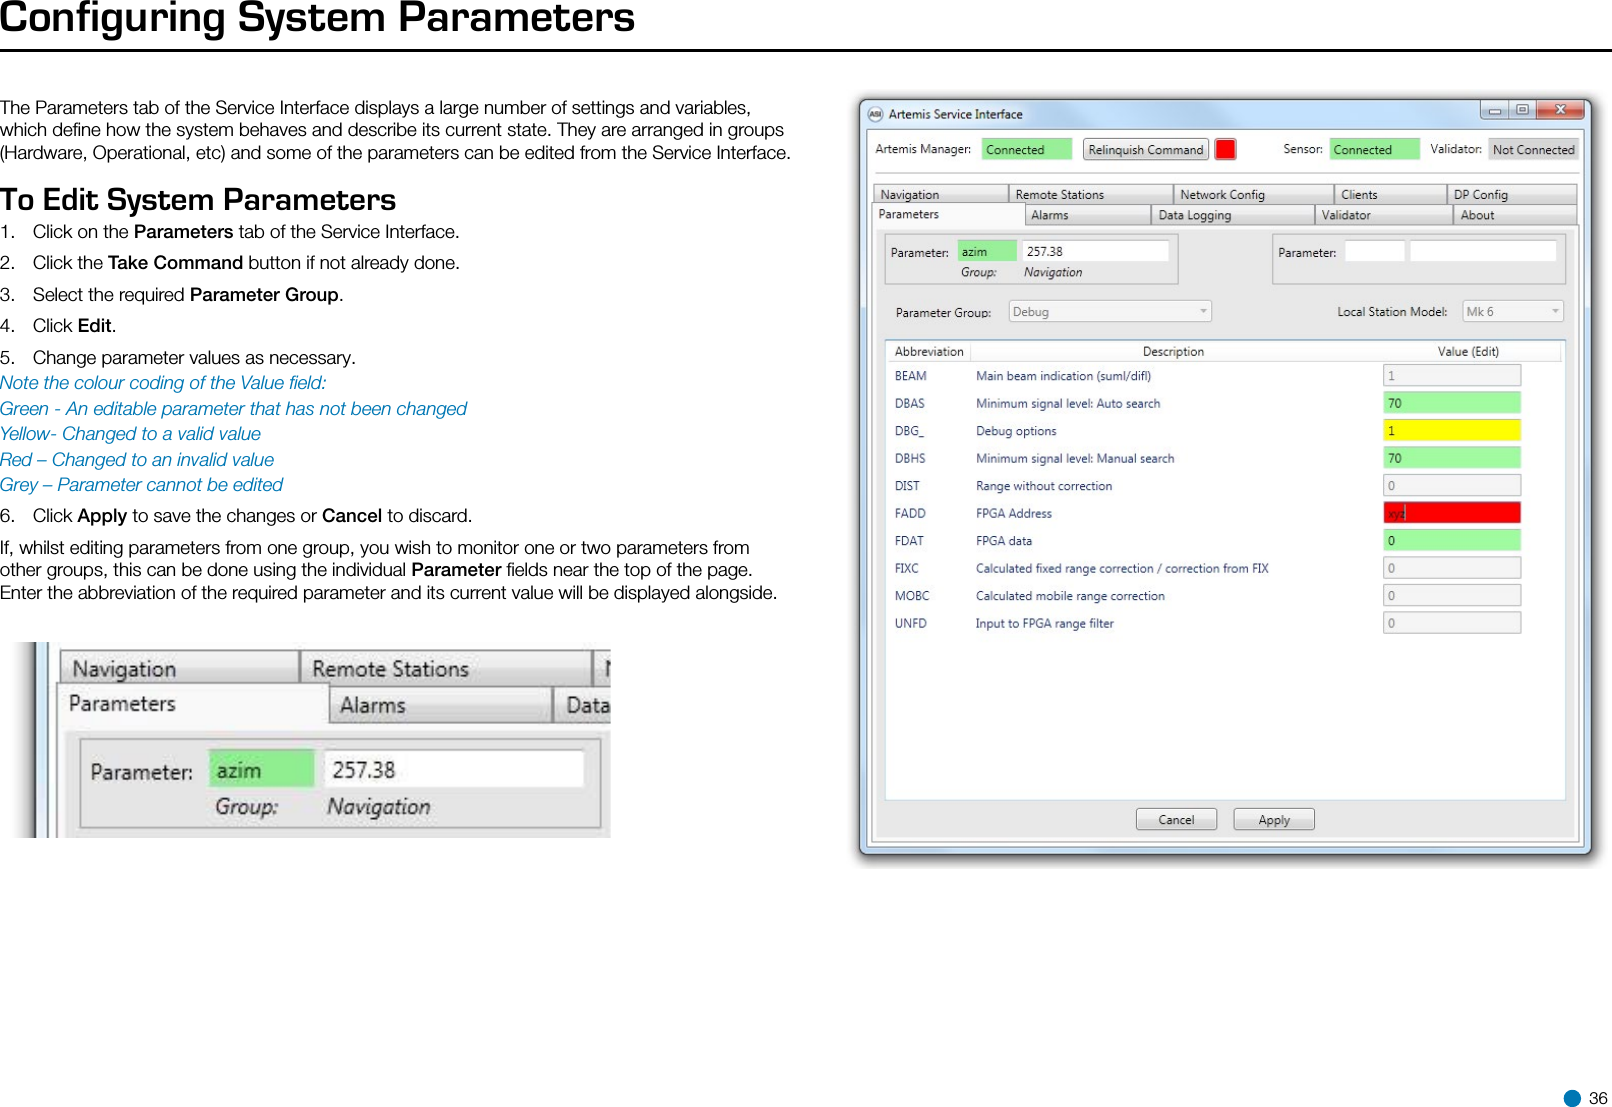 Configuring System ParametersTo Edit System Parameters  1.  Click on the Parameters tab of the Service Interface.2.  Click the Take Command button if not already done.3.  Select the required Parameter Group.4.  Click Edit.5.  Change parameter values as necessary.Note the colour coding of the Value ﬁeld:Green - An editable parameter that has not been changedYellow- Changed to a valid valueRed – Changed to an invalid valueGrey – Parameter cannot be edited6.  Click Apply to save the changes or Cancel to discard.If, whilst editing parameters from one group, you wish to monitor one or two parameters from other groups, this can be done using the individual Parameter ﬁelds near the top of the page. Enter the abbreviation of the required parameter and its current value will be displayed alongside.The Parameters tab of the Service Interface displays a large number of settings and variables, which deﬁne how the system behaves and describe its current state. They are arranged in groups (Hardware, Operational, etc) and some of the parameters can be edited from the Service Interface. 36